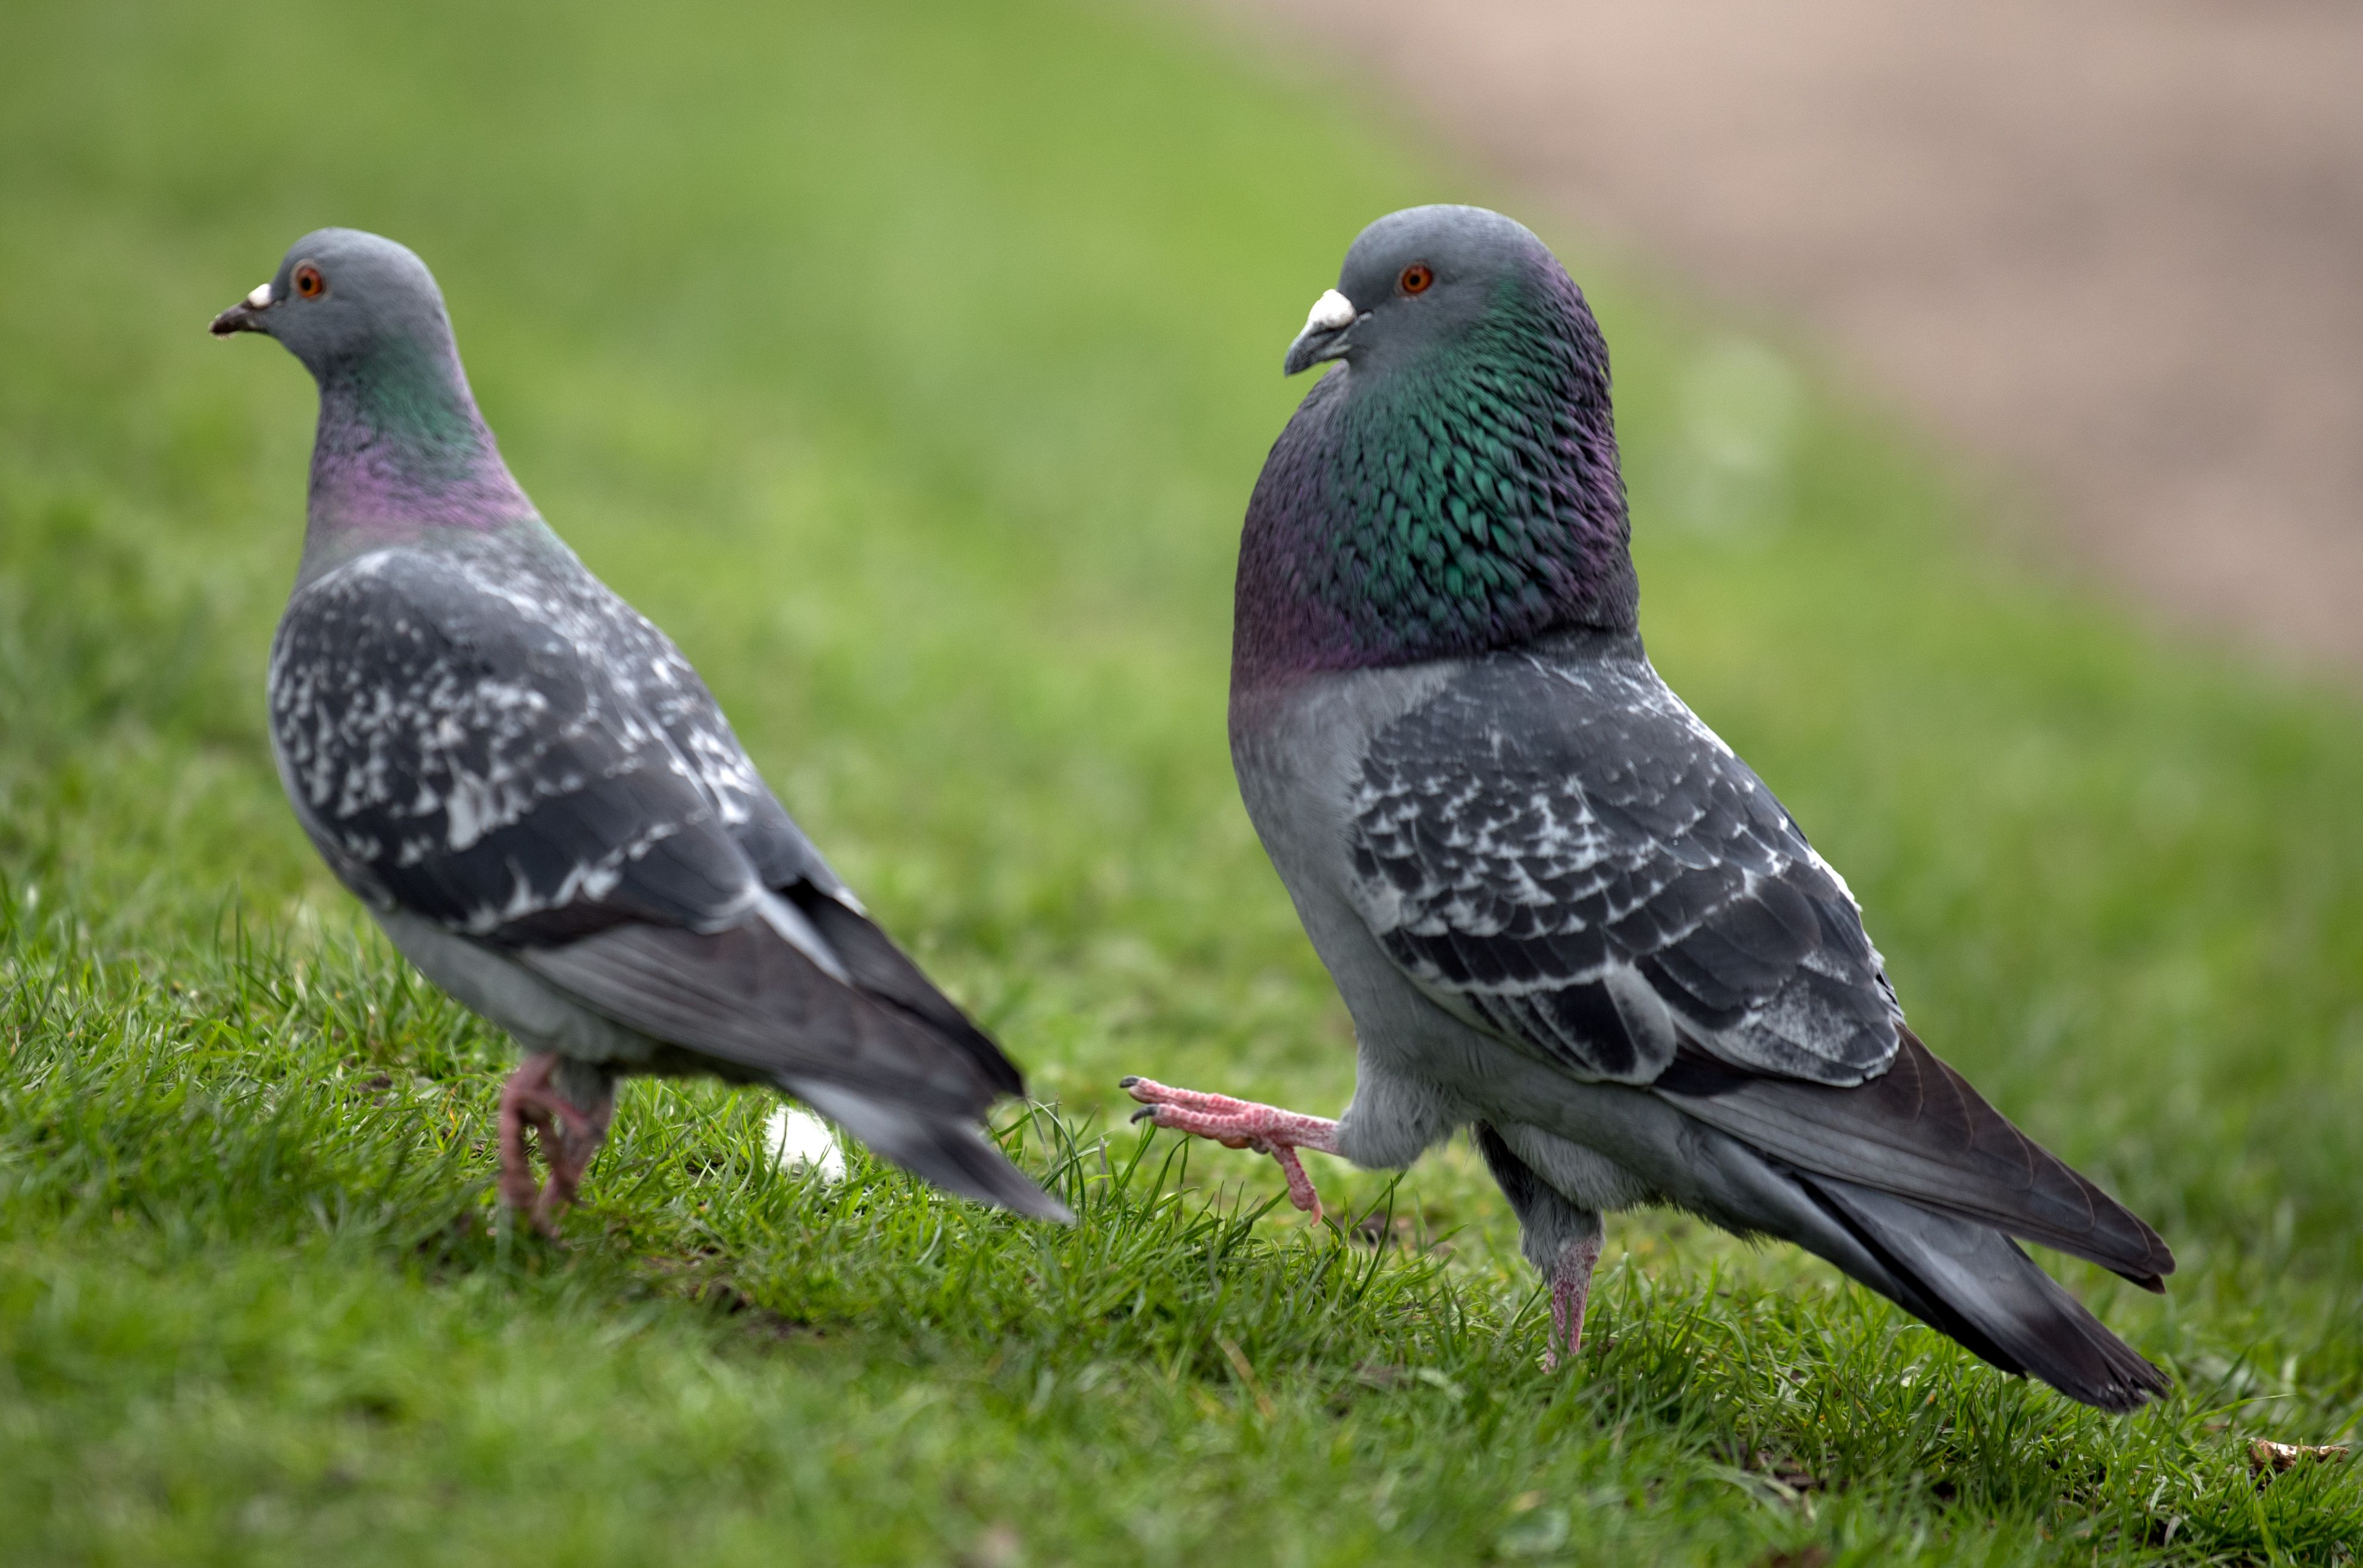 Close-Up Of Pigeons On Grass